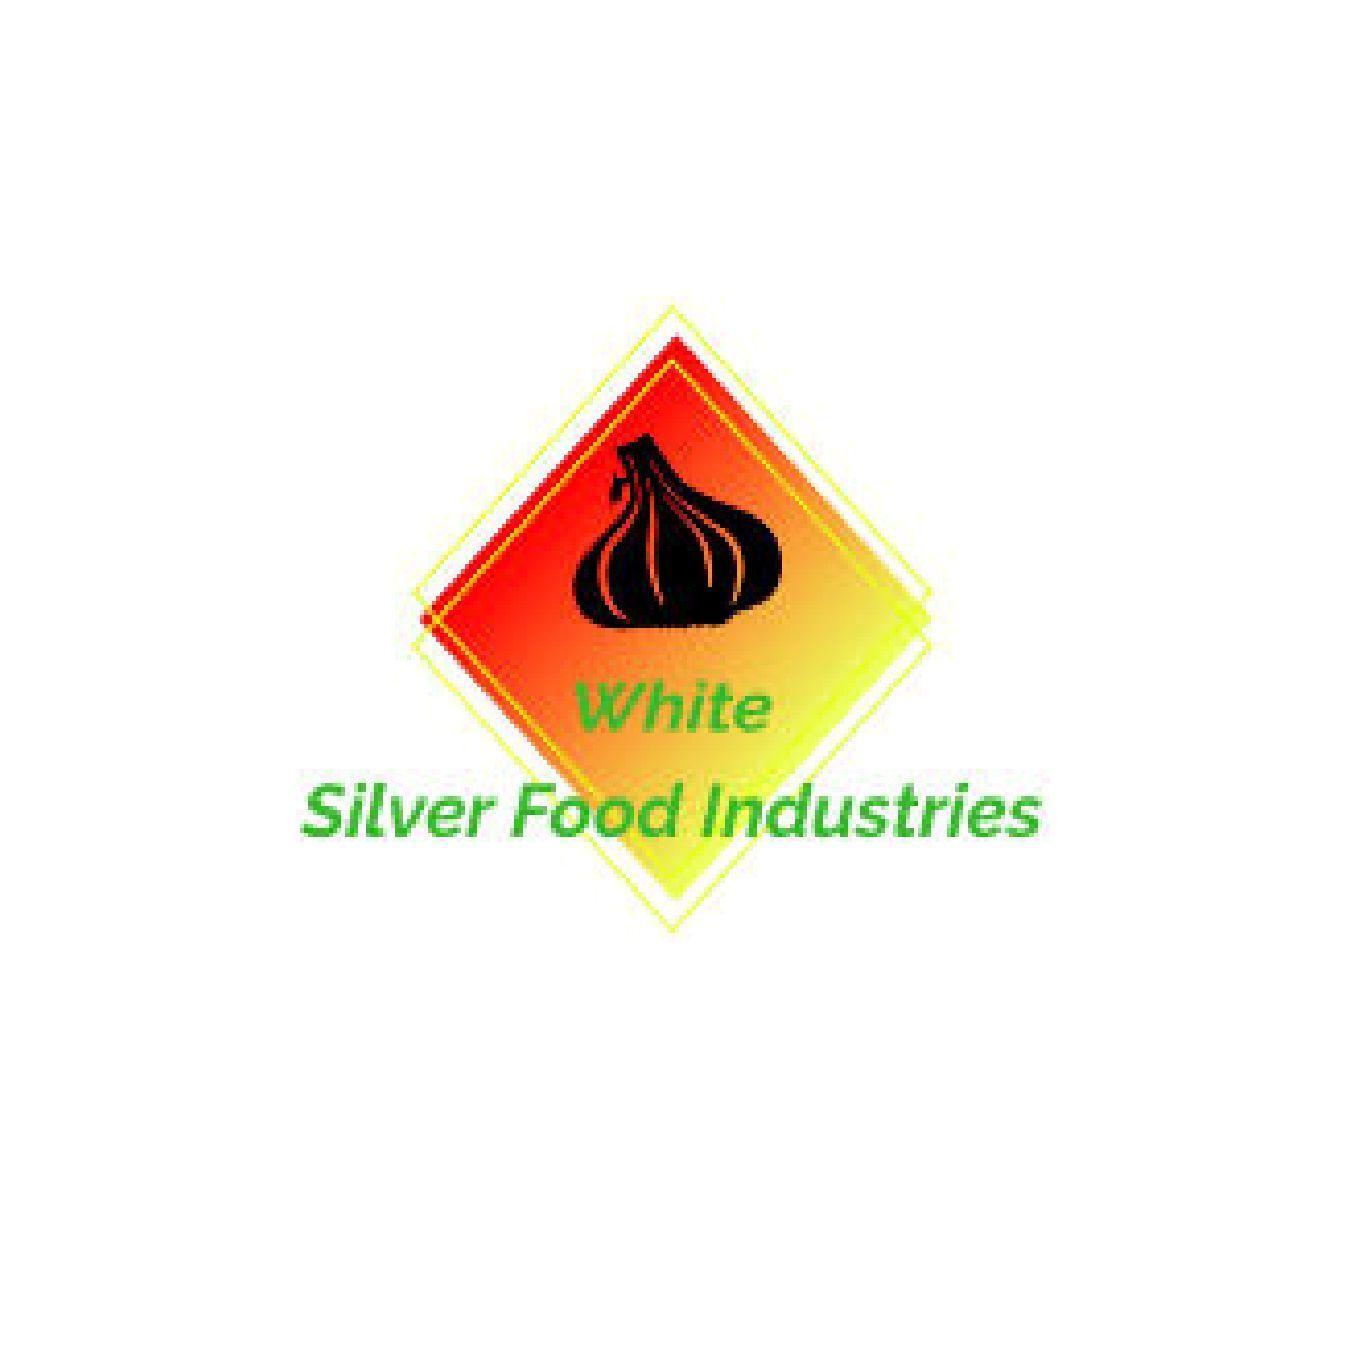 White Silver Food Industries